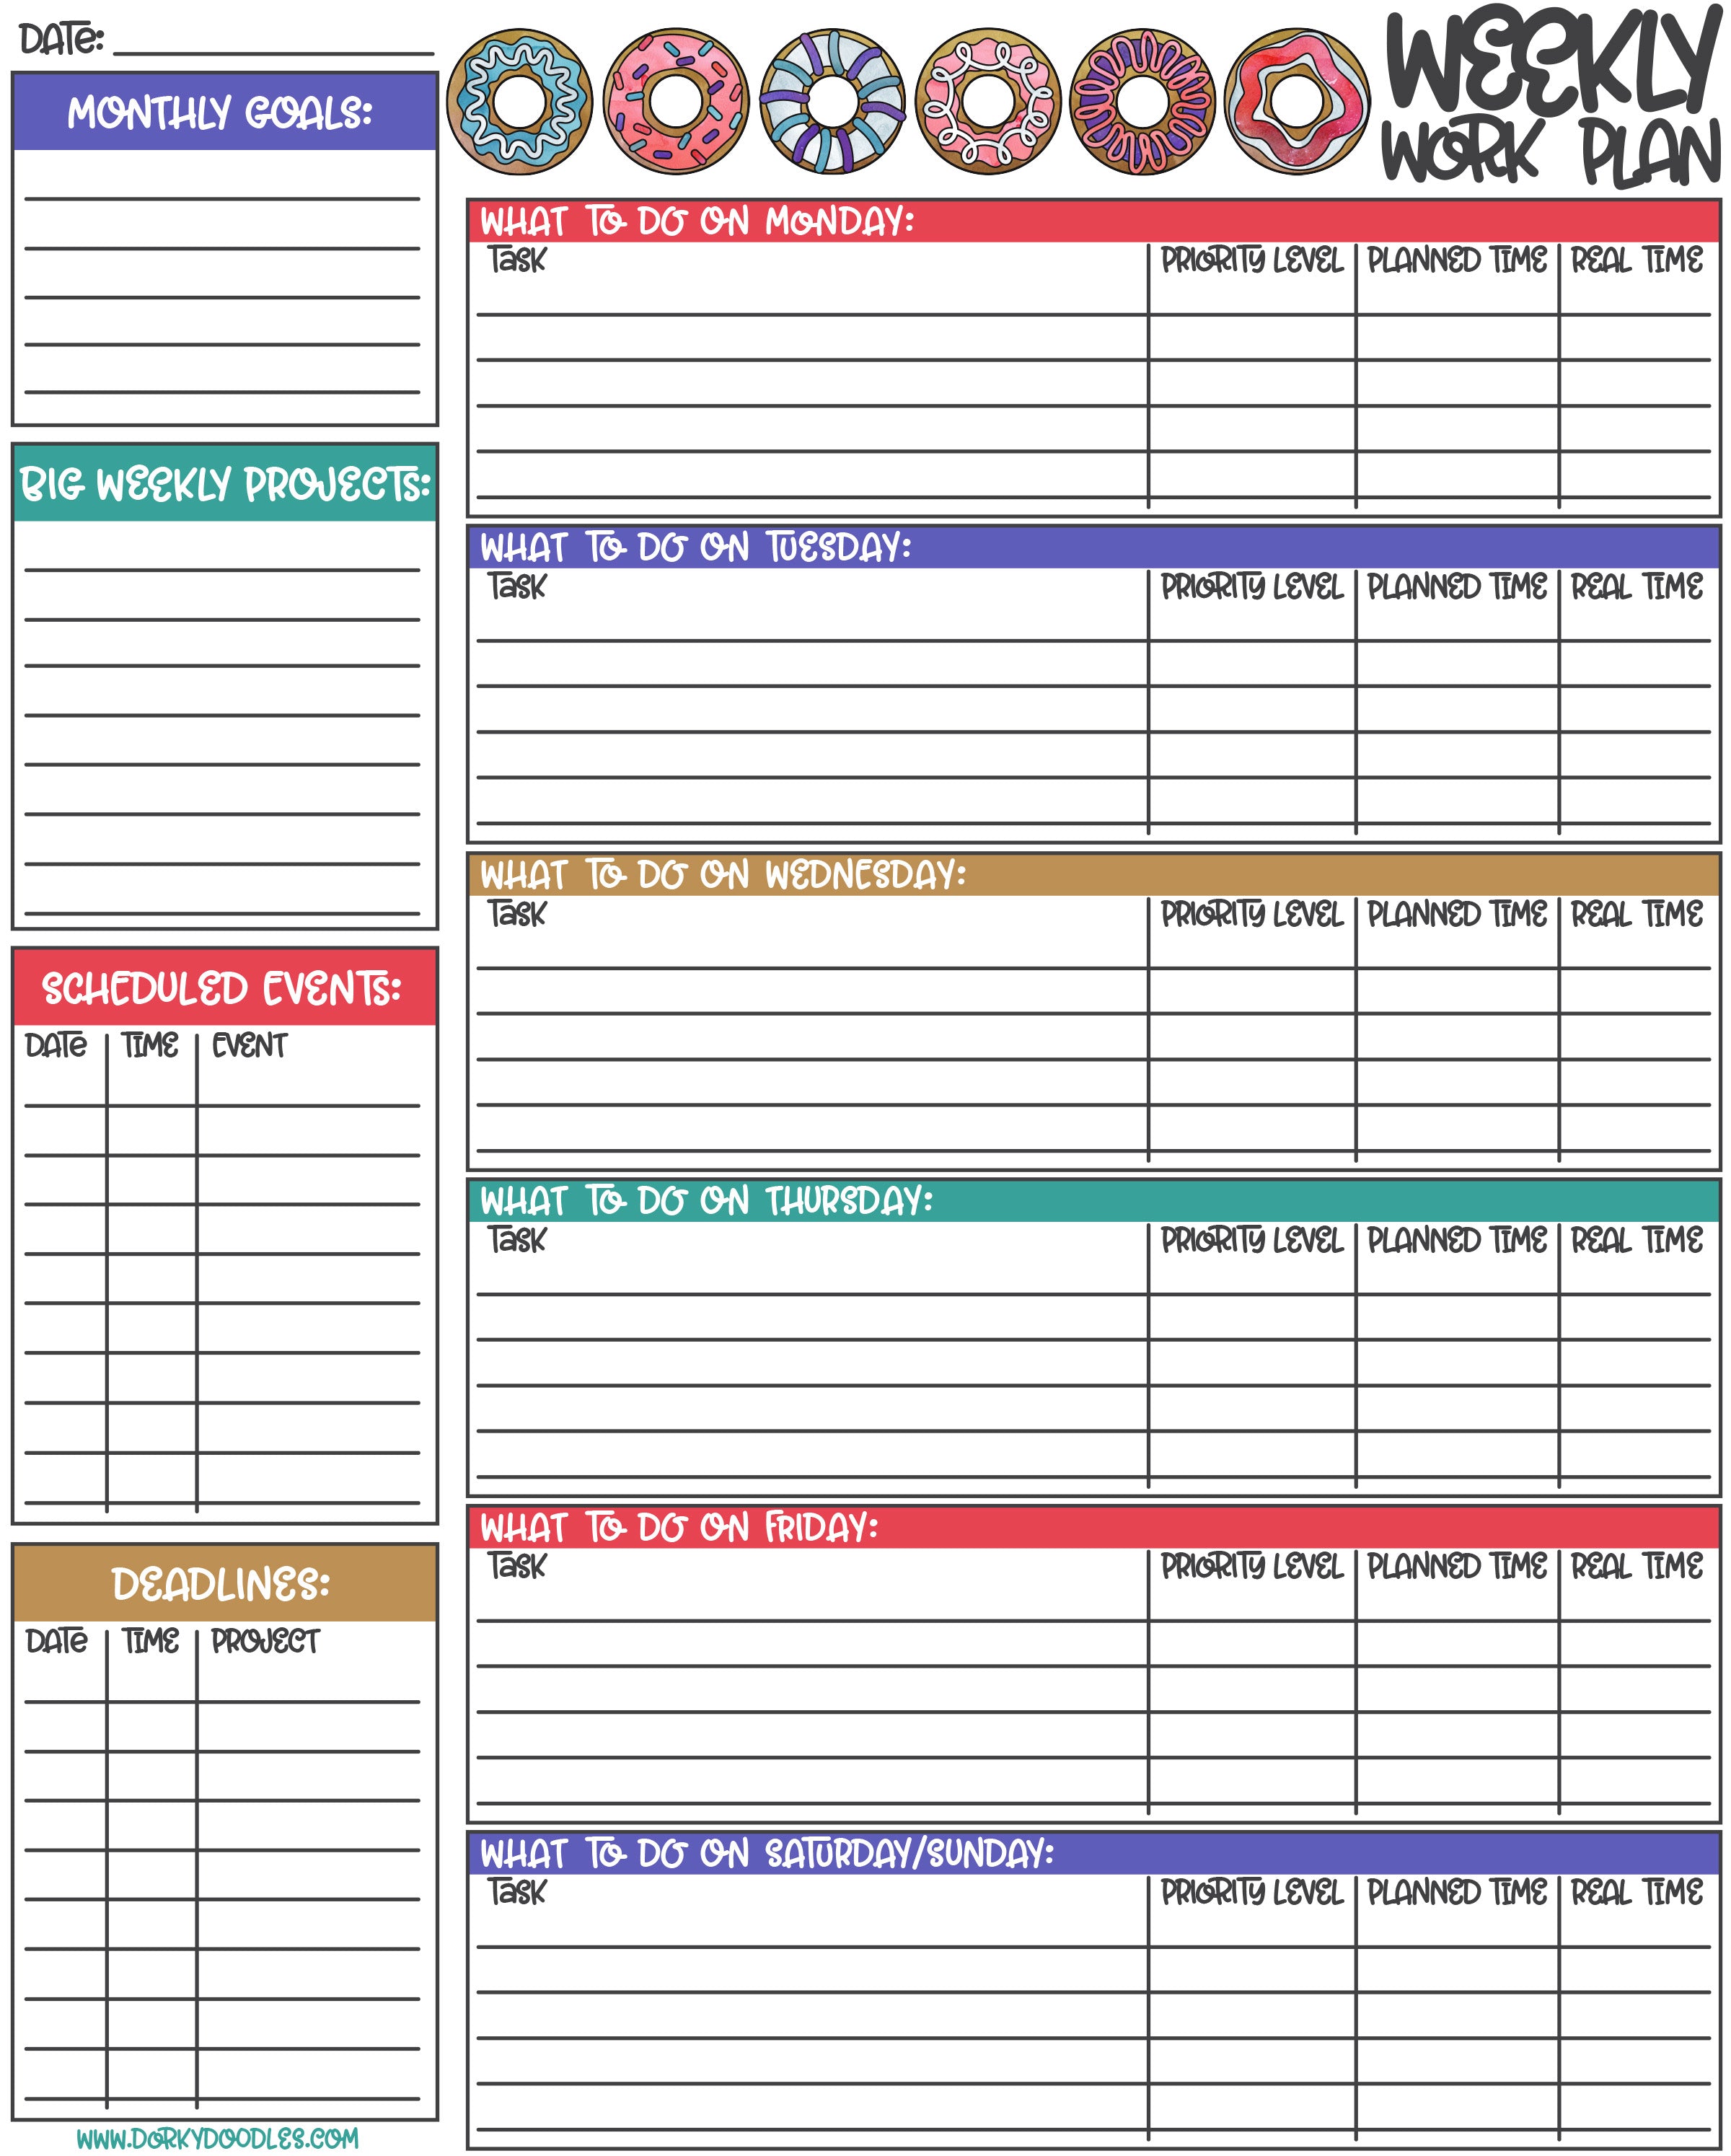 Printable Weekly Planner for Work and Home - Dorky Doodles